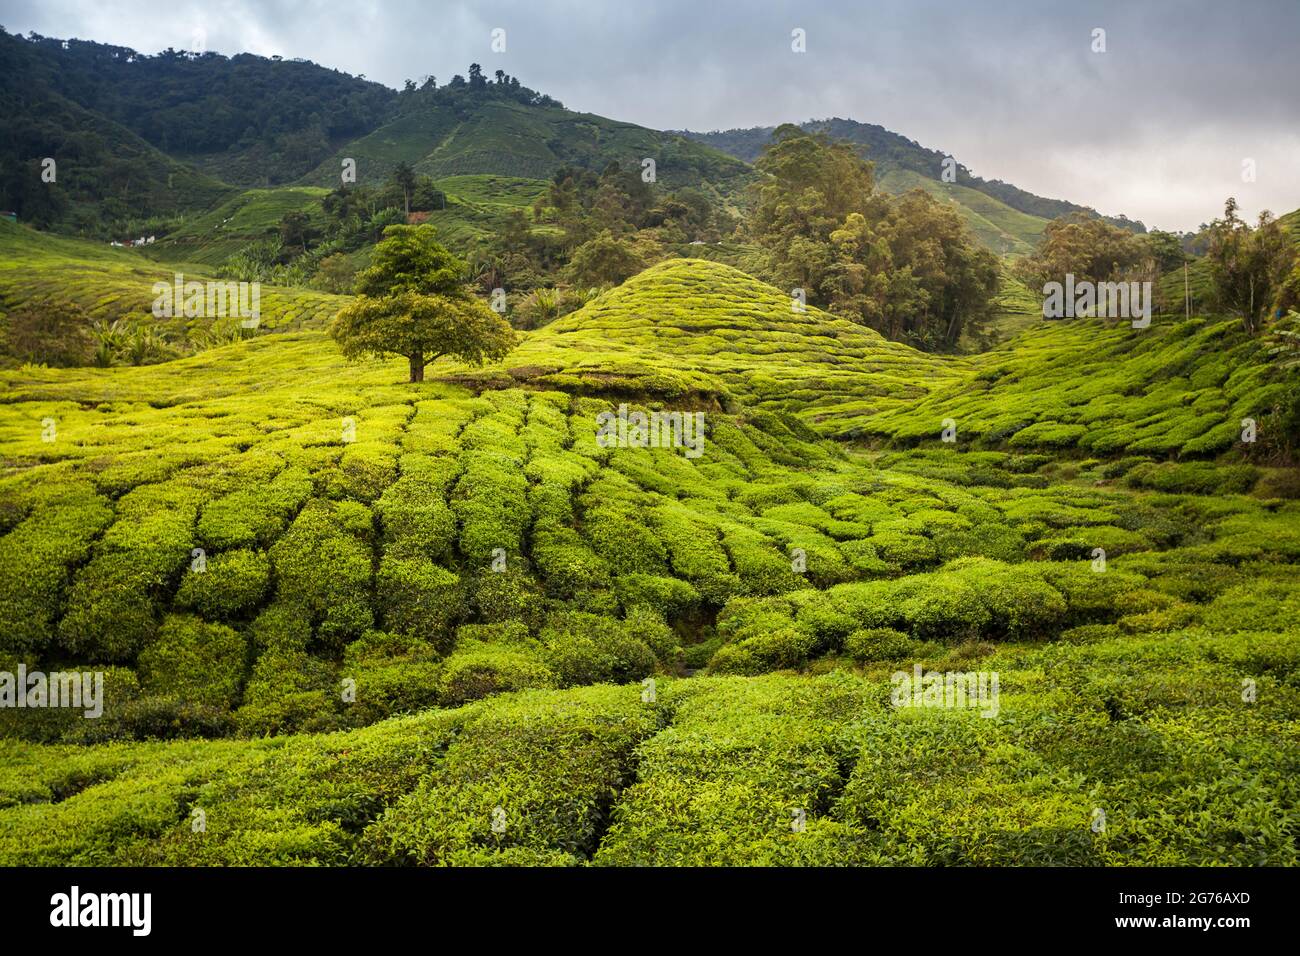 hiking in the tea plantation. sightseeing in lovely landscapes with green leafs Stock Photo